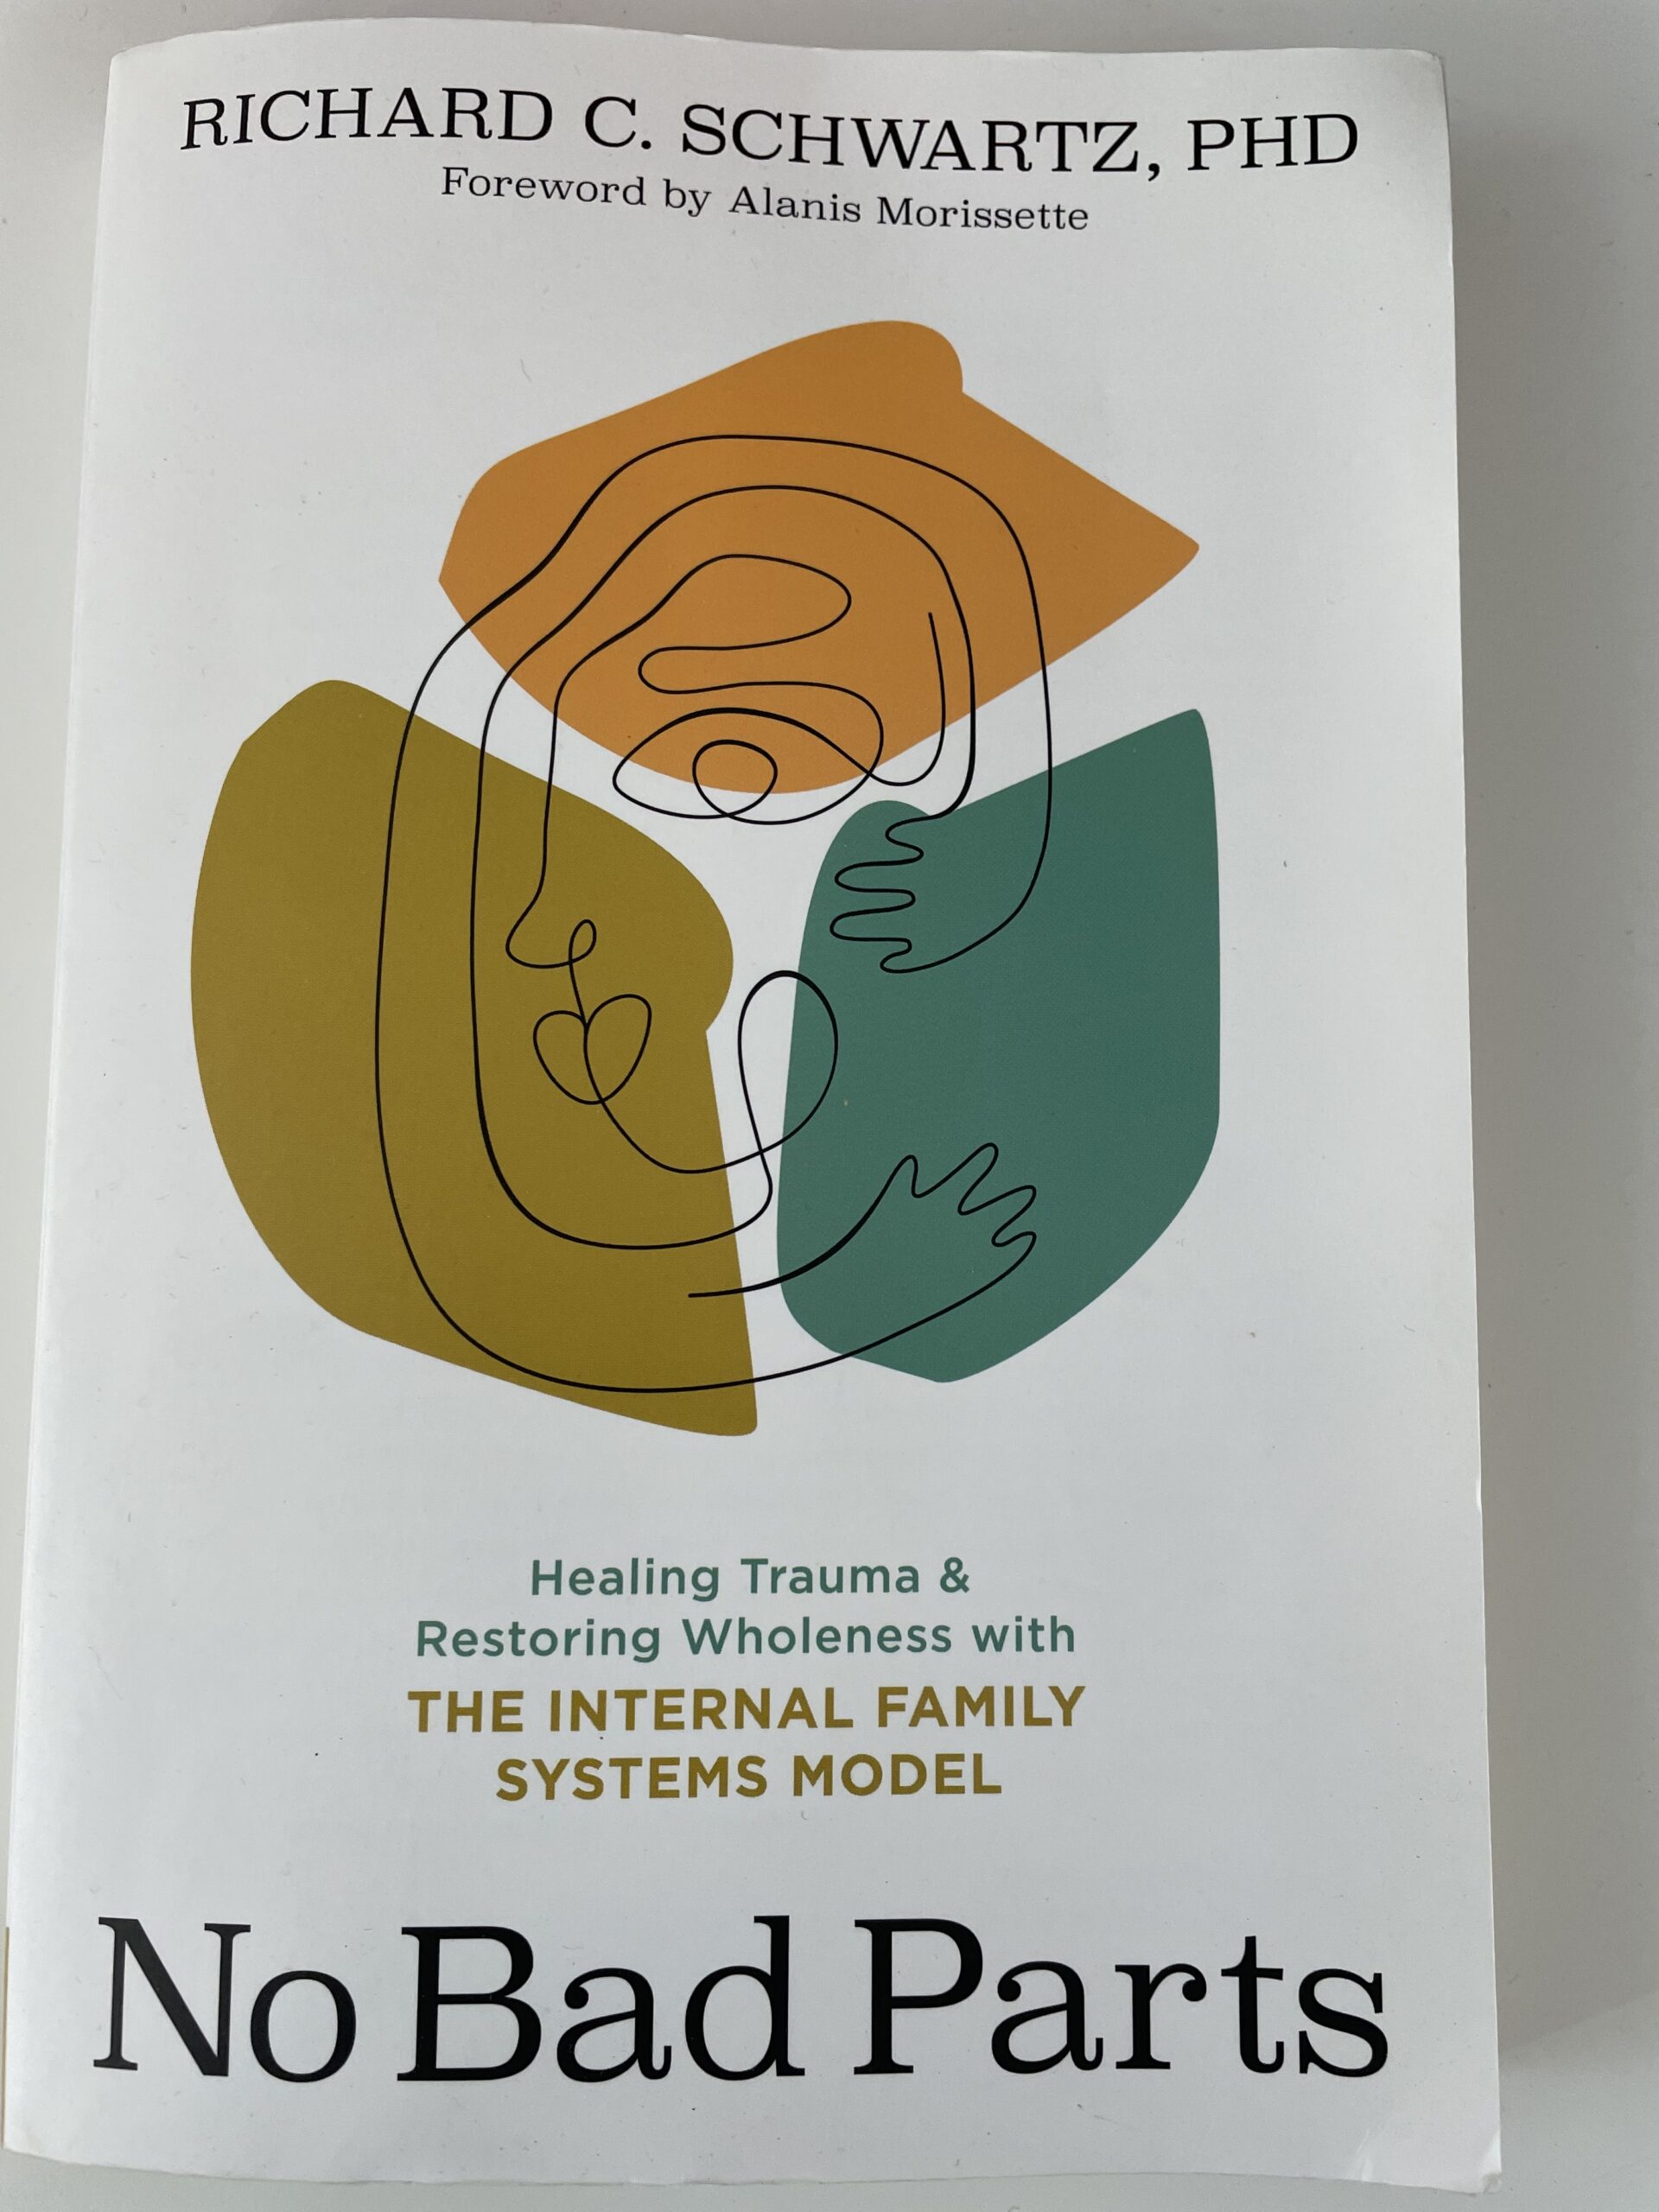 Making our “parts” whole again: Internal Family Systems therapy (IFS)